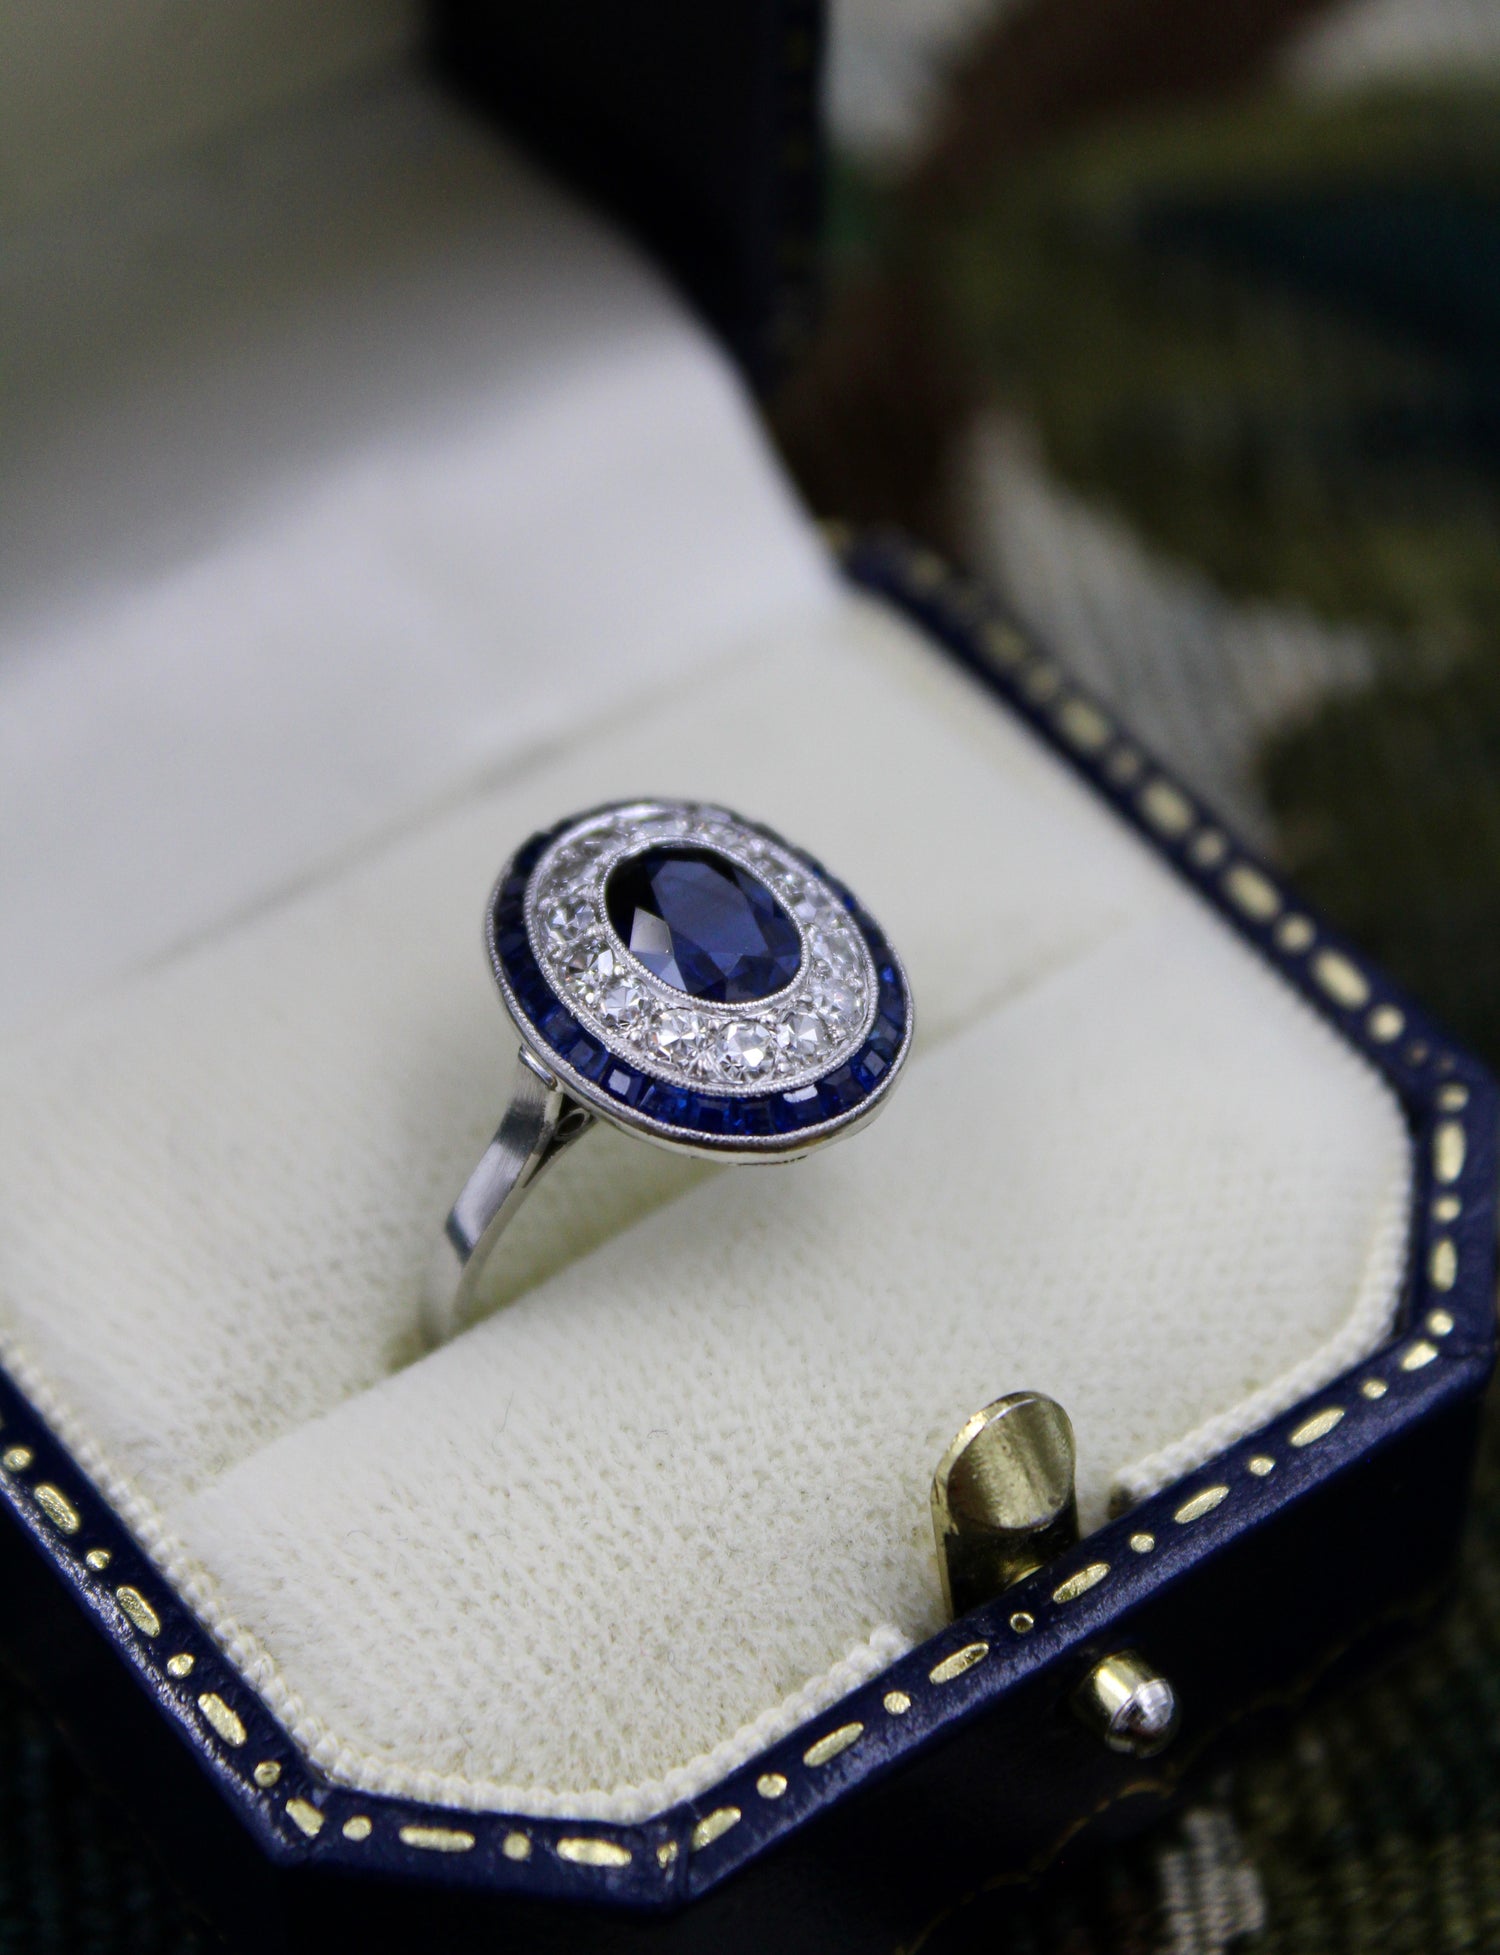 A very fine Platinum, Diamond & Sapphire Oval Target Ring, centrally Rub-over set with an Unheated Burma Sapphire. French. Circa 1930. - Robin Haydock Antiques